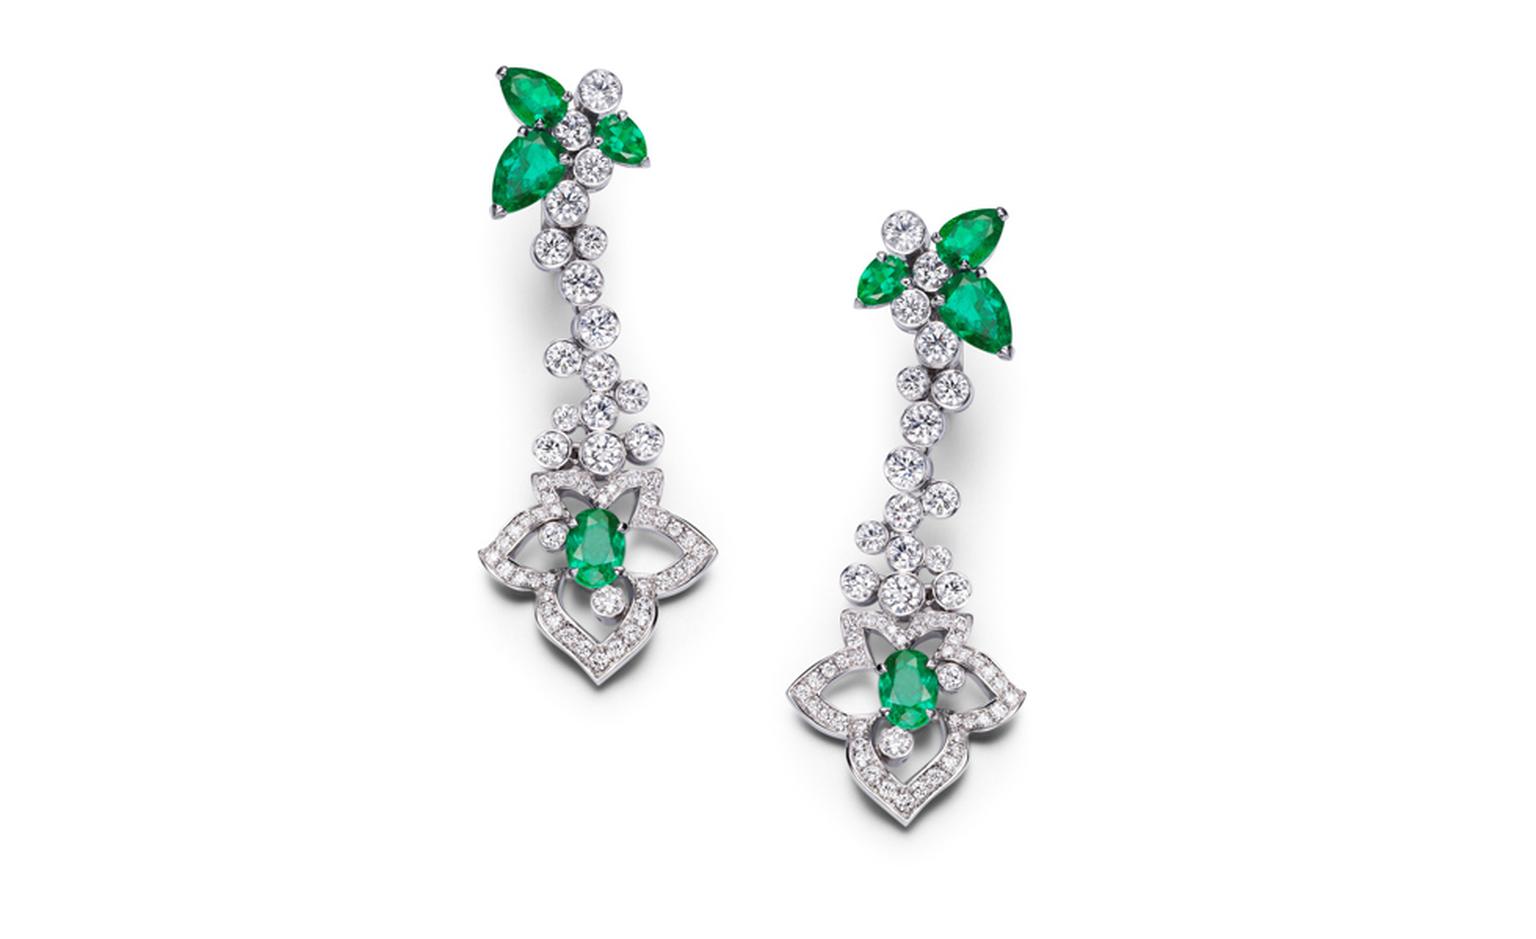 PIAGET, Limelight Garden Party, white gold earrings set with diamonds, emeralds and 6 pear-shaped emeralds